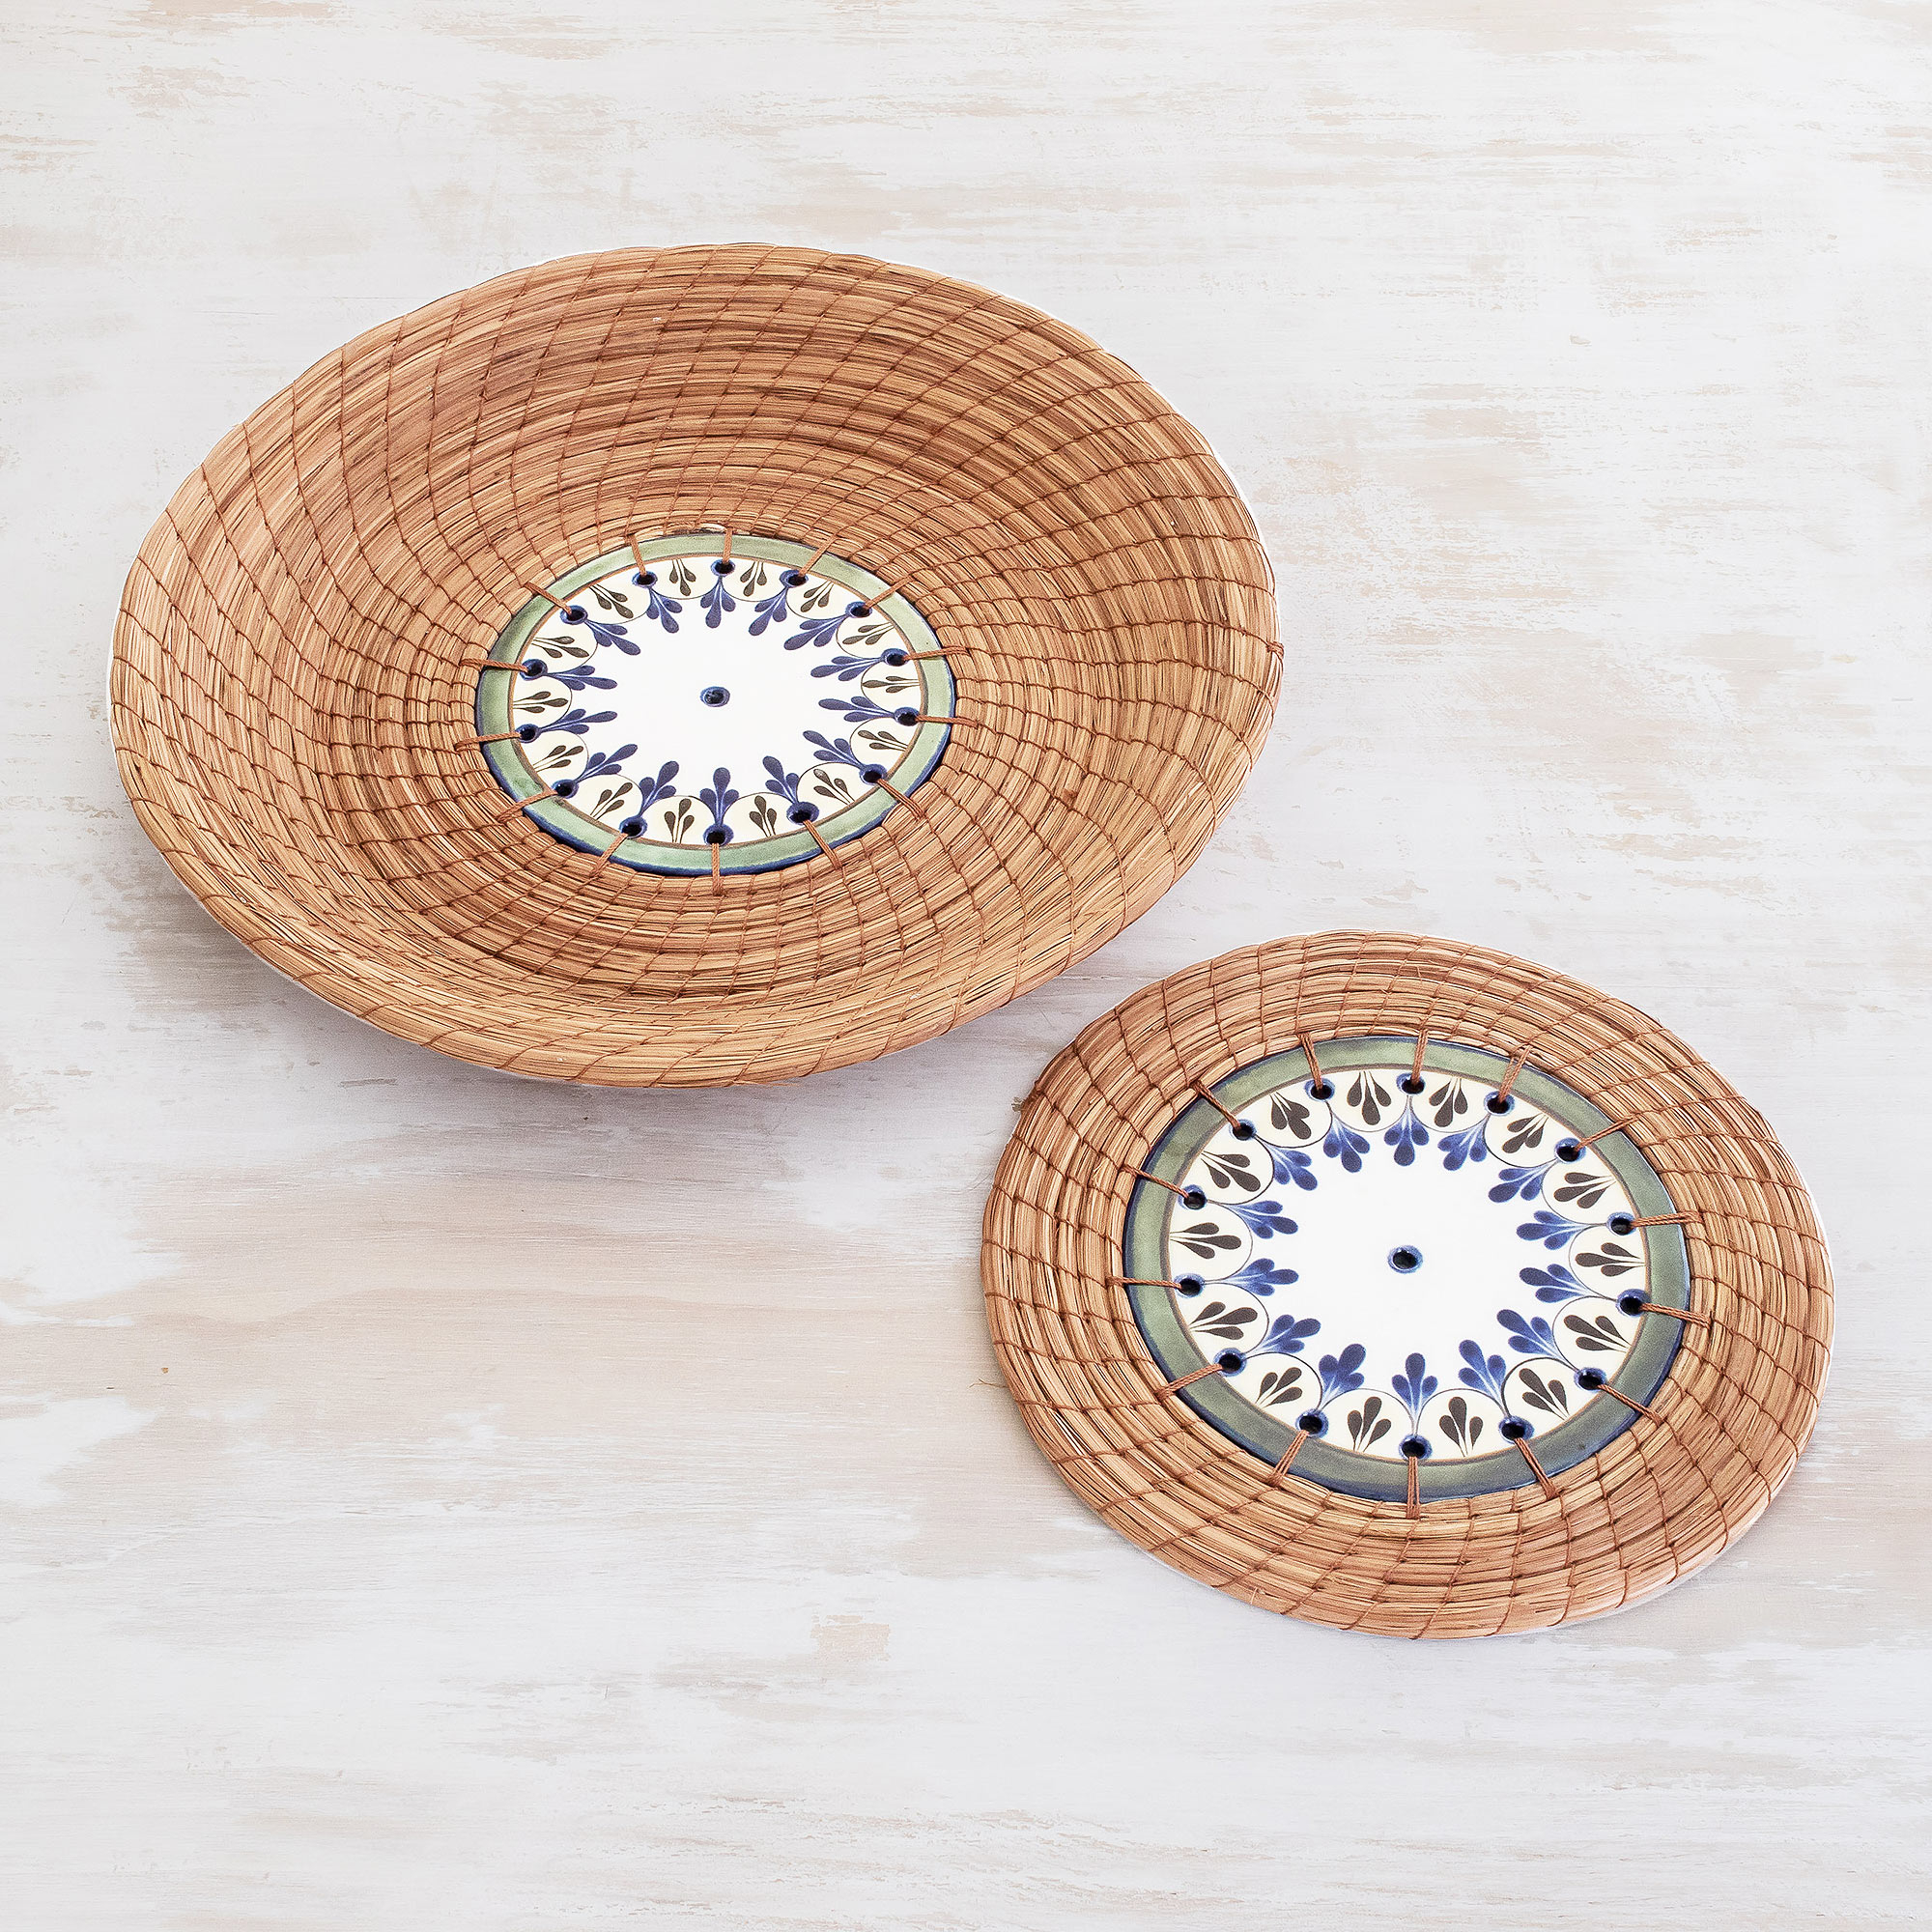 Pine Needle and Ceramic Basket and Trivet (Pair) - Natural Beauty | NOVICA